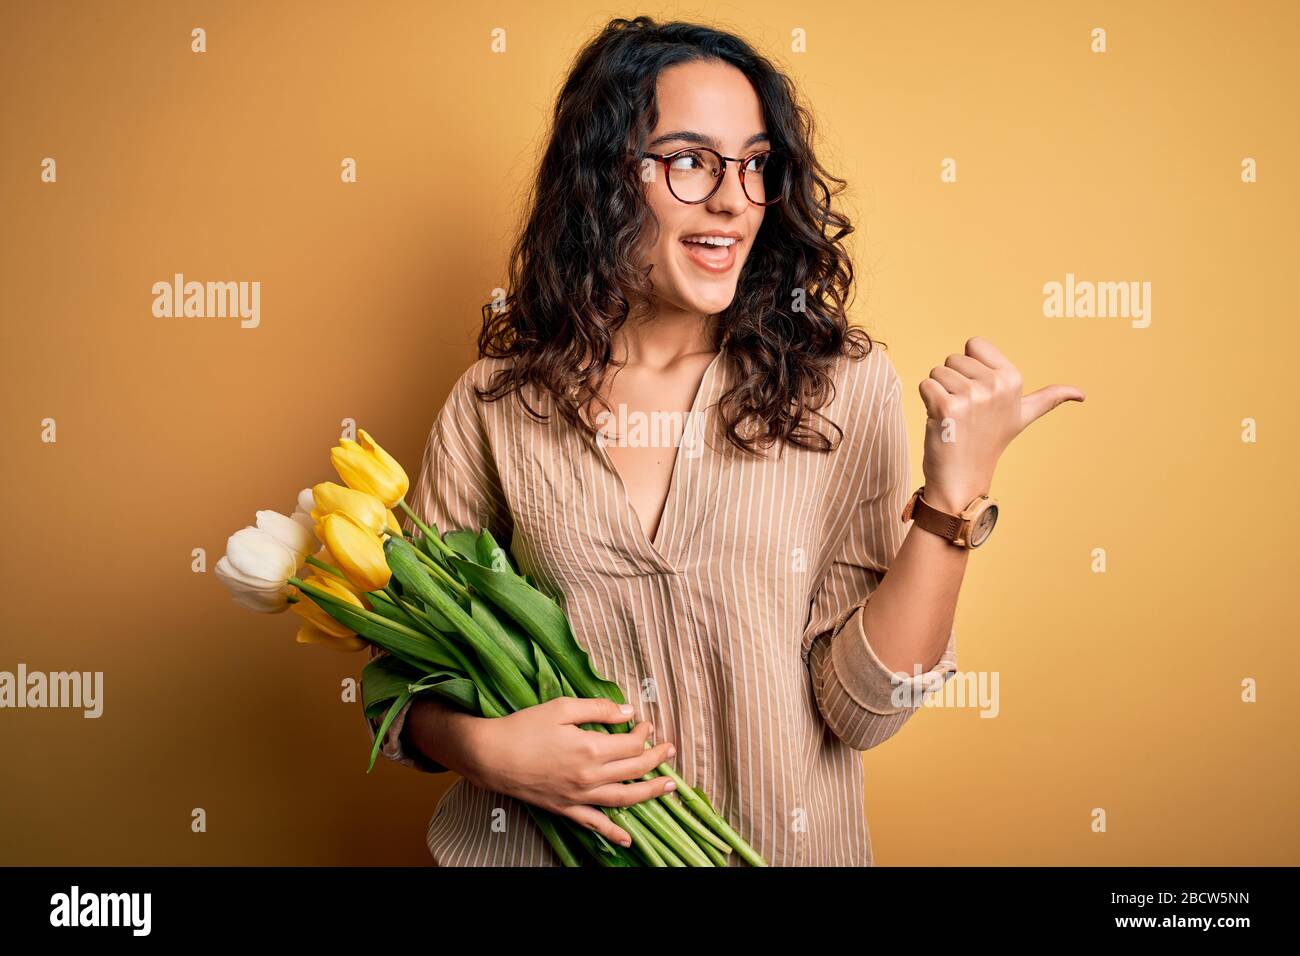 Young beautiful romantic woman with curly hair holding bouquet of yellow tulips smiling with happy face looking and pointing to the side with thumb up Stock Photo